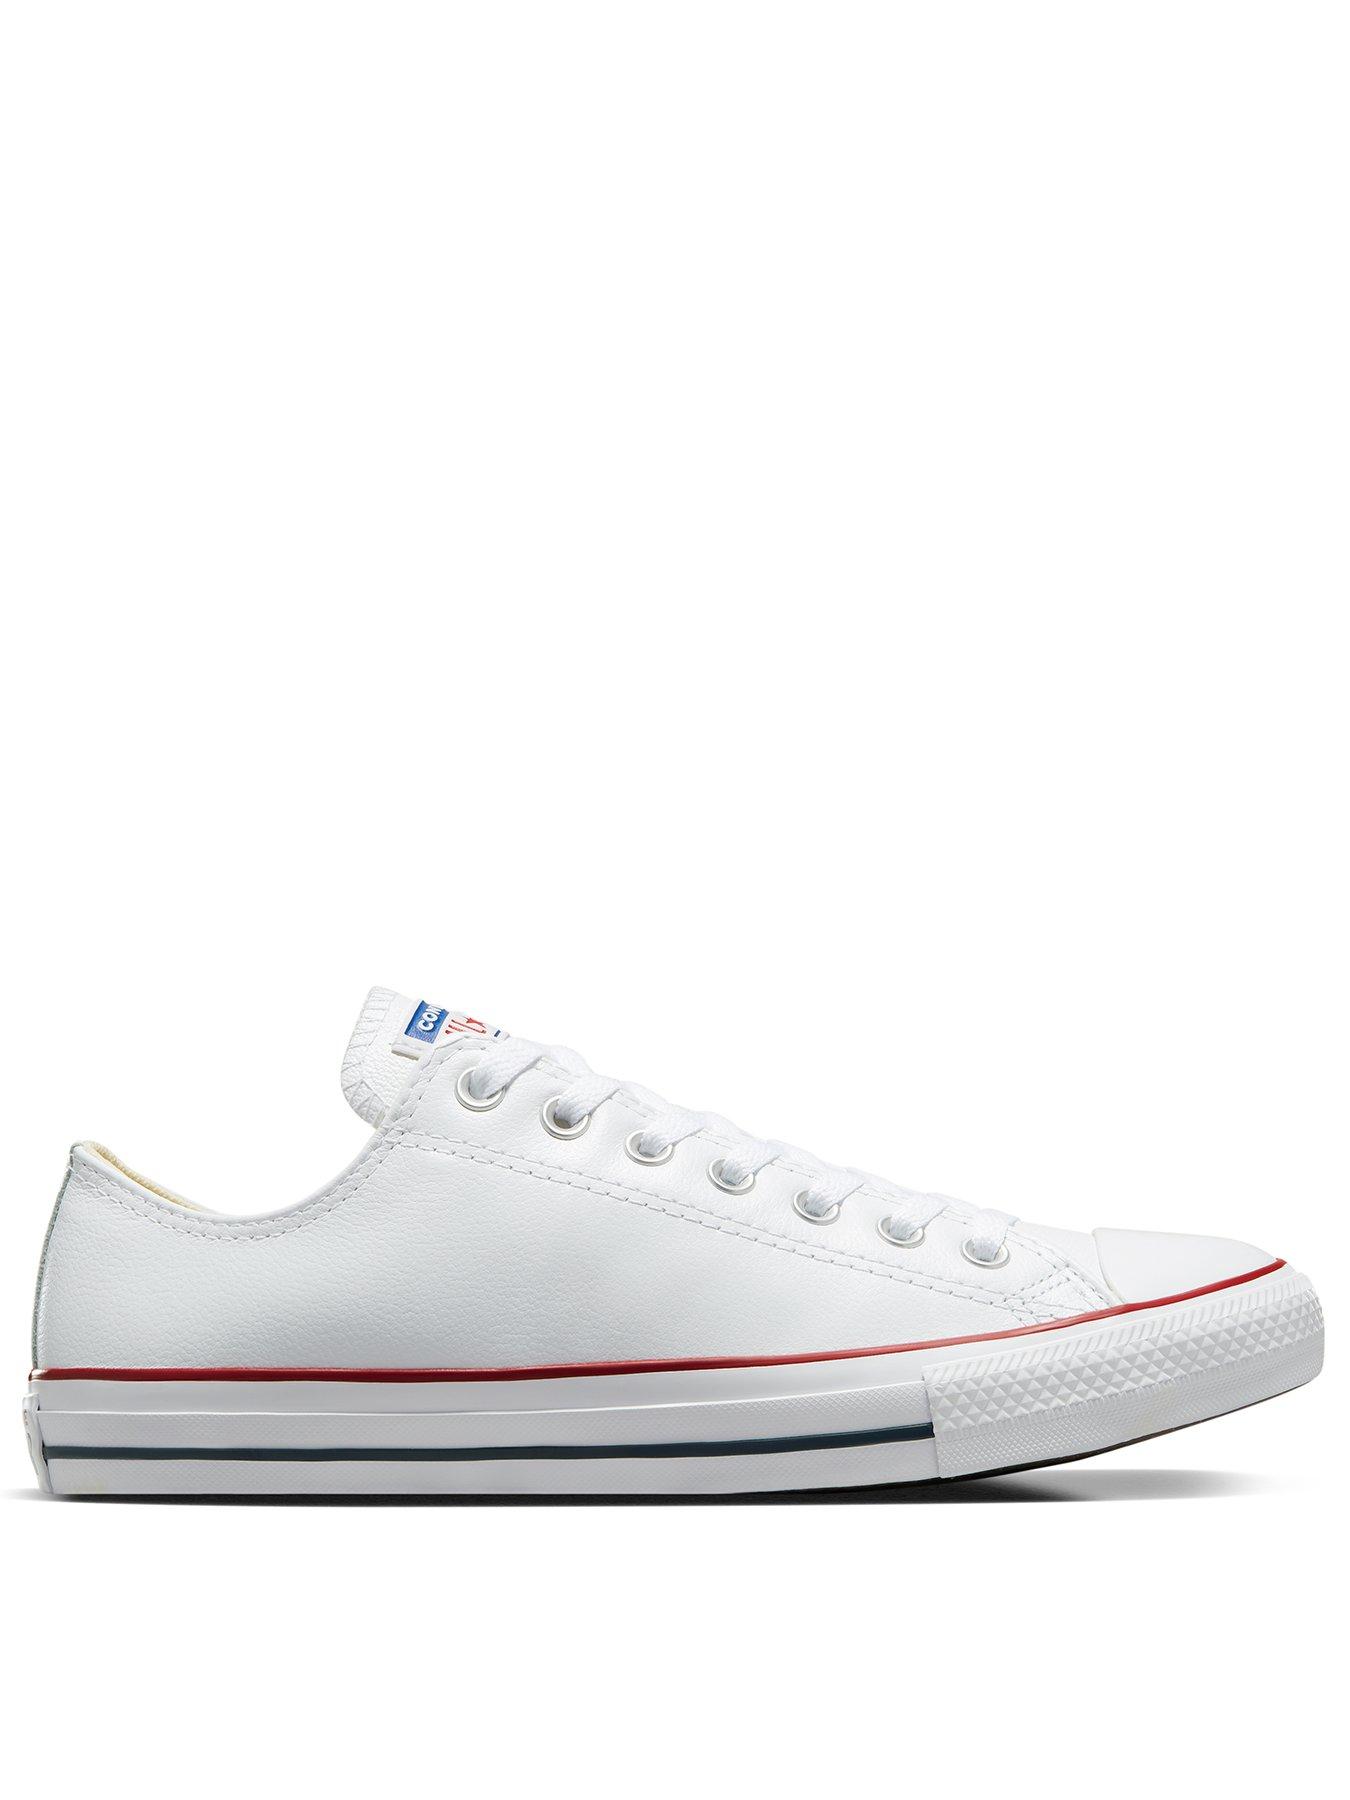 converse chuck taylor all star leather ox uk